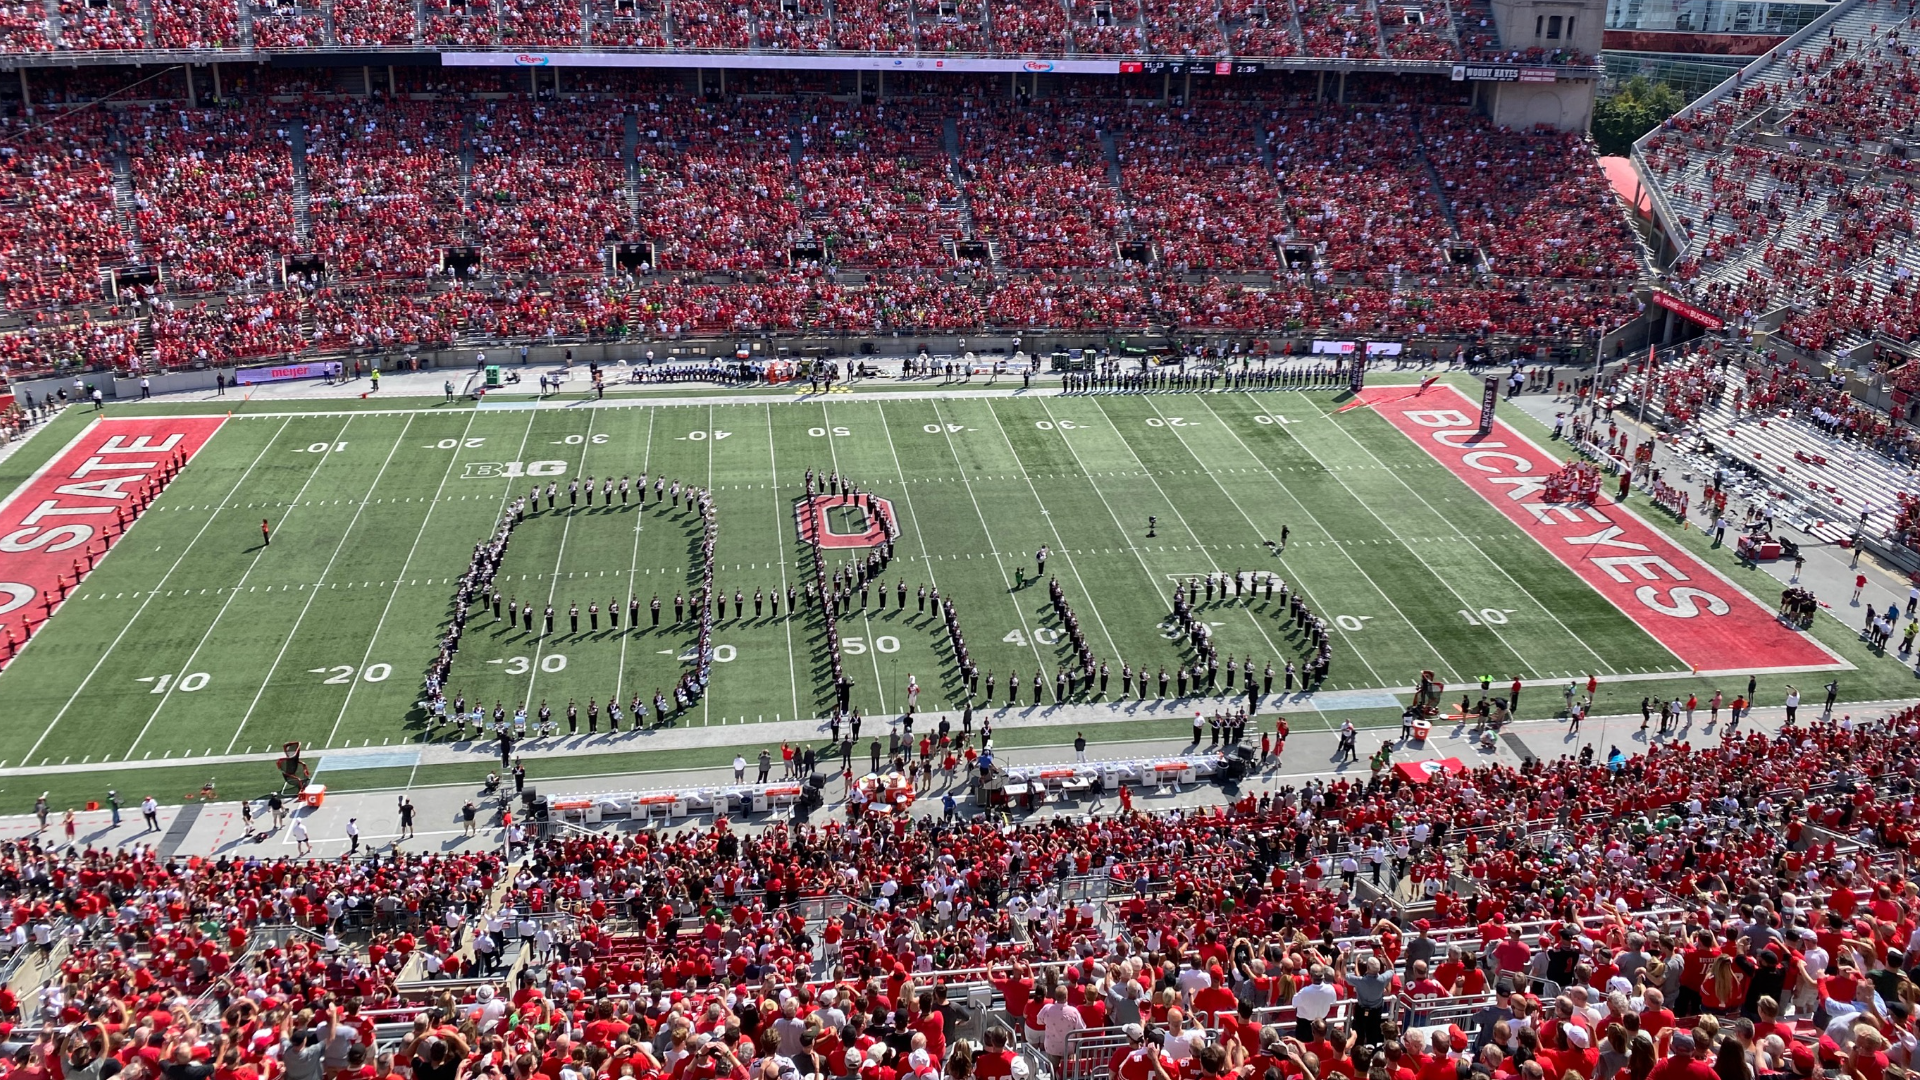 The Ohio State University Marching Band, AKA The Best Damn Band in the Land, performs Script Ohio during pregame of the home opener against Oregon.